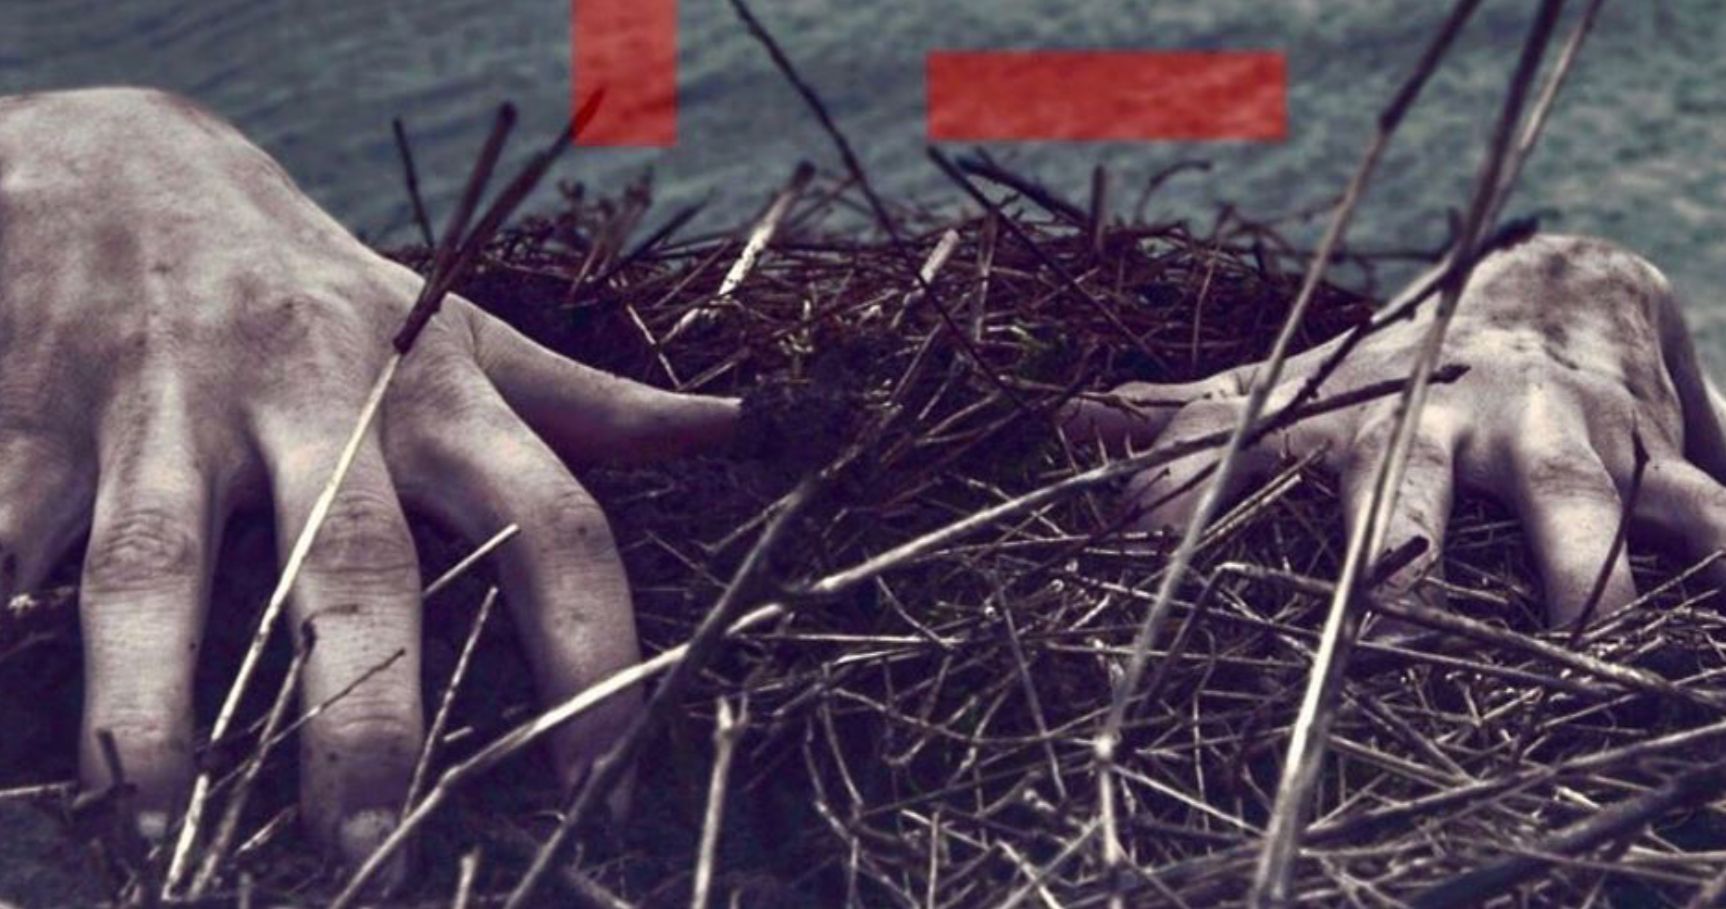 American Horror Story Season 10 Poster Teases a Haunting Oceanside Mystery